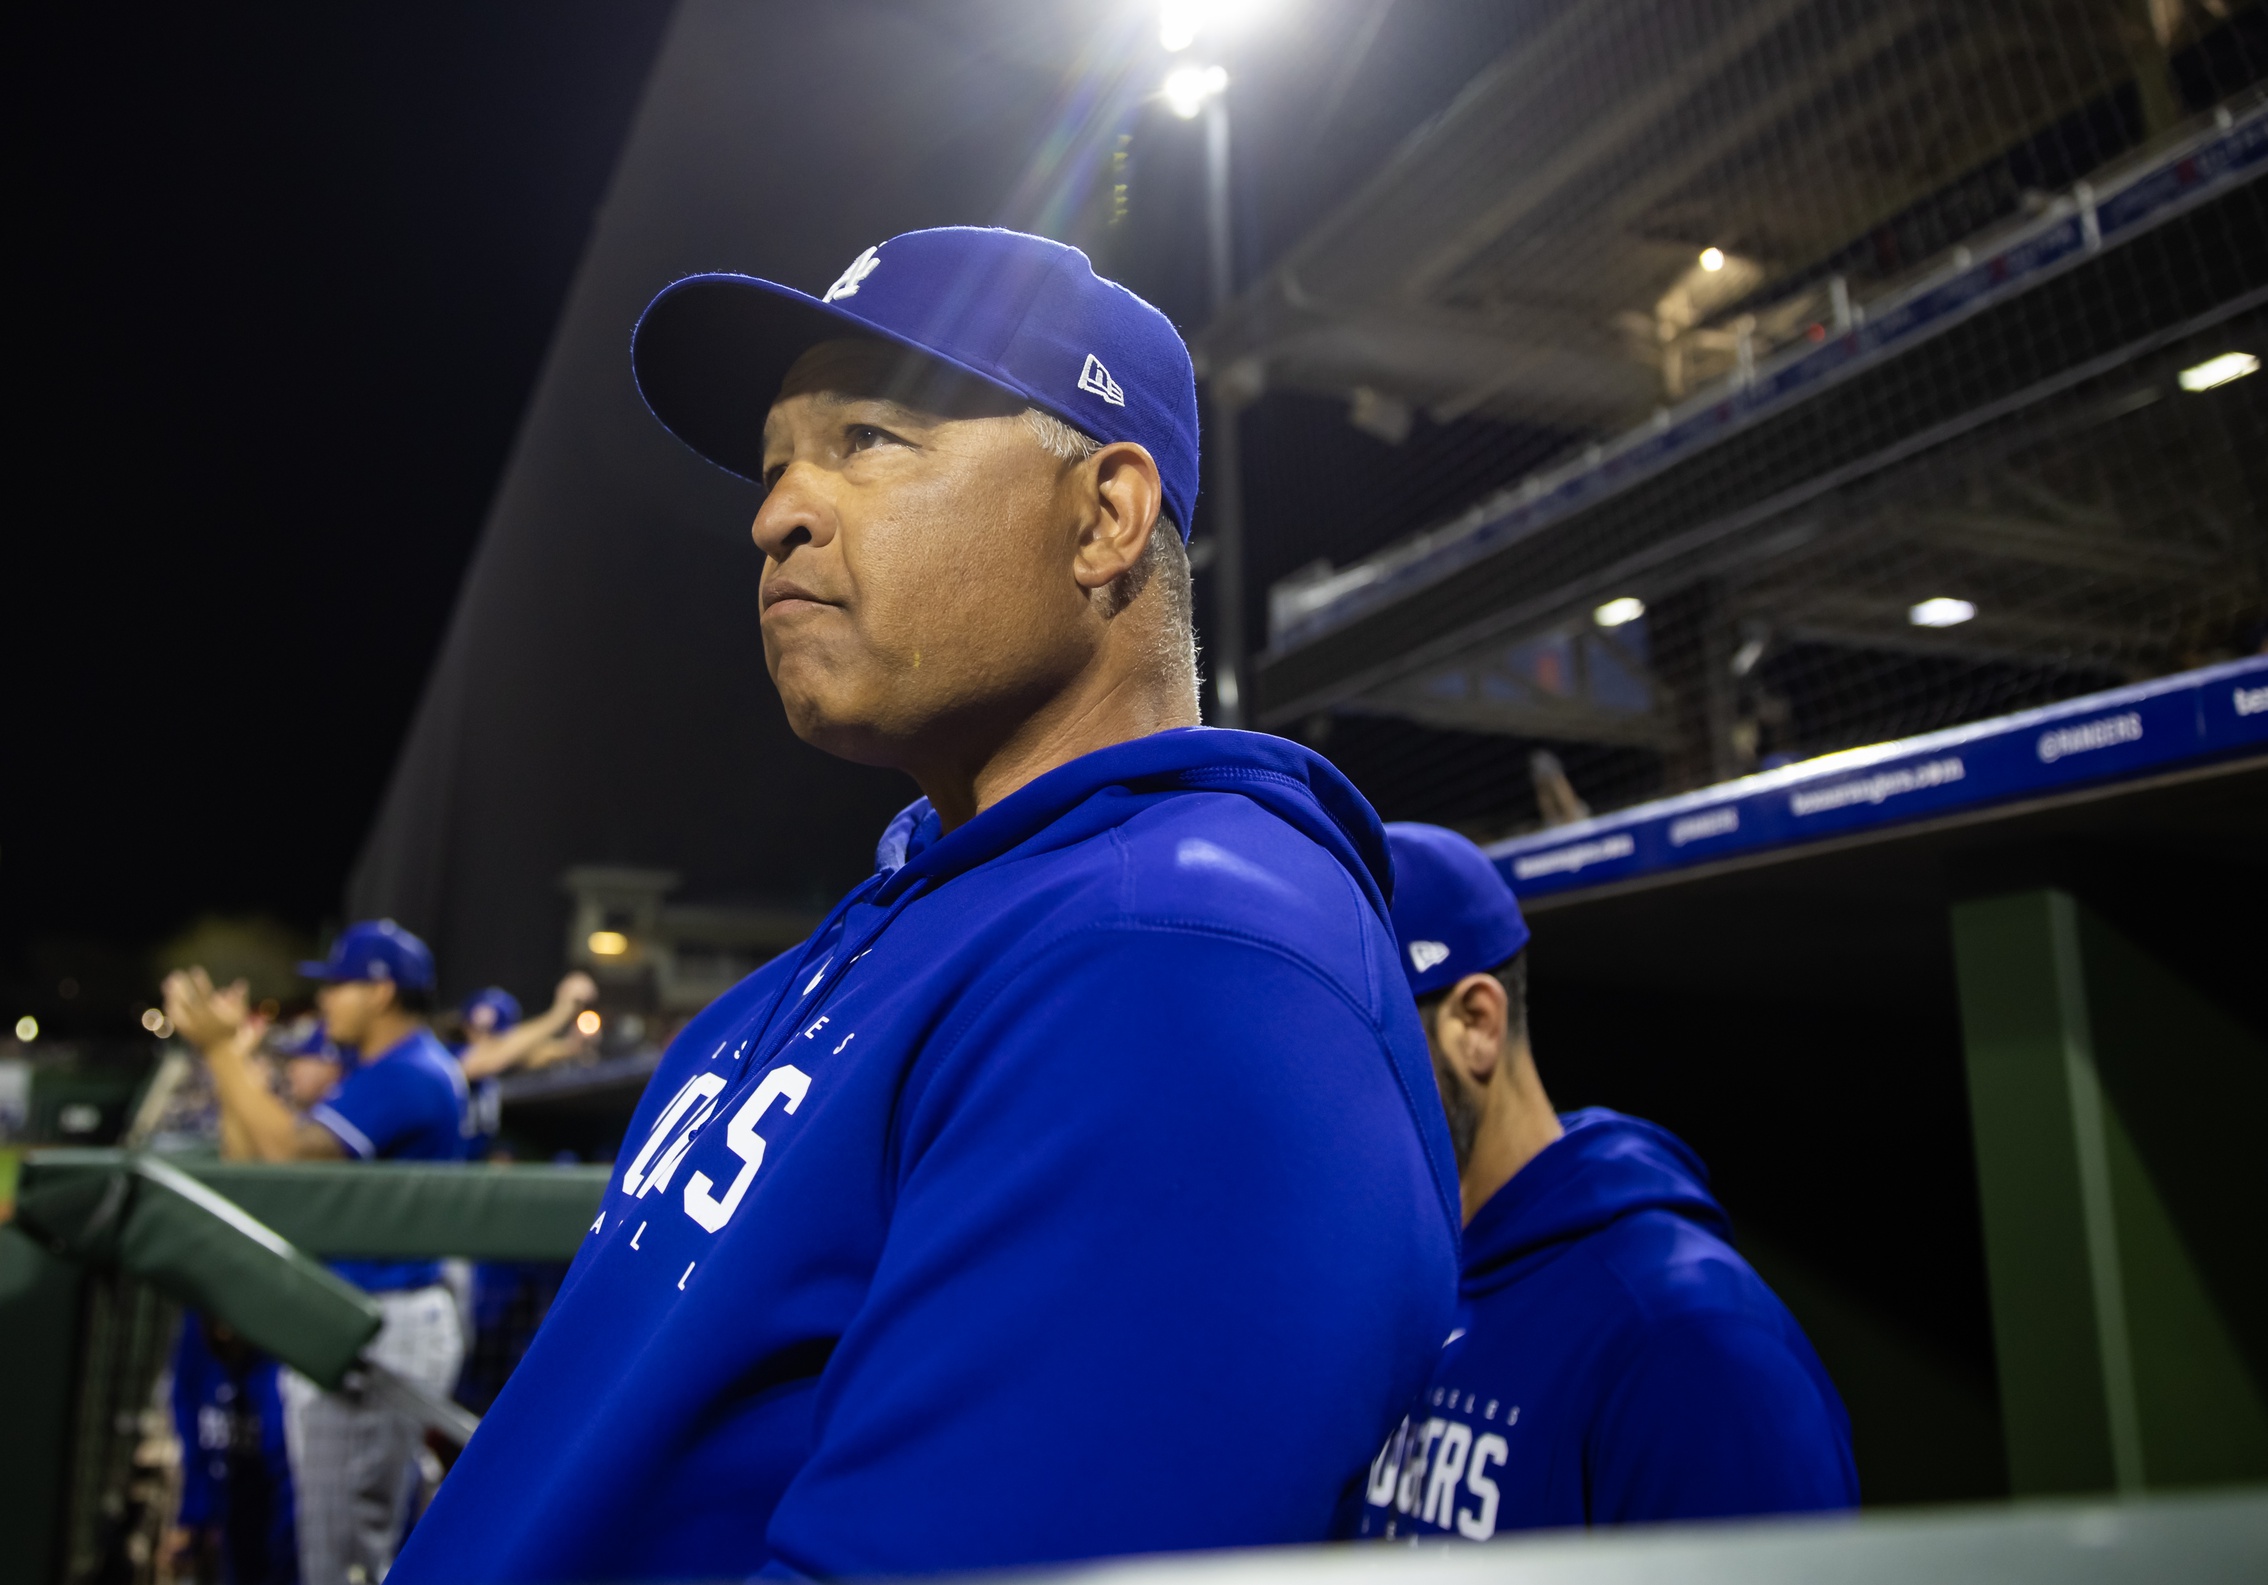 Padres notes: Dodgers manager Dave Roberts, of Cardiff, learning